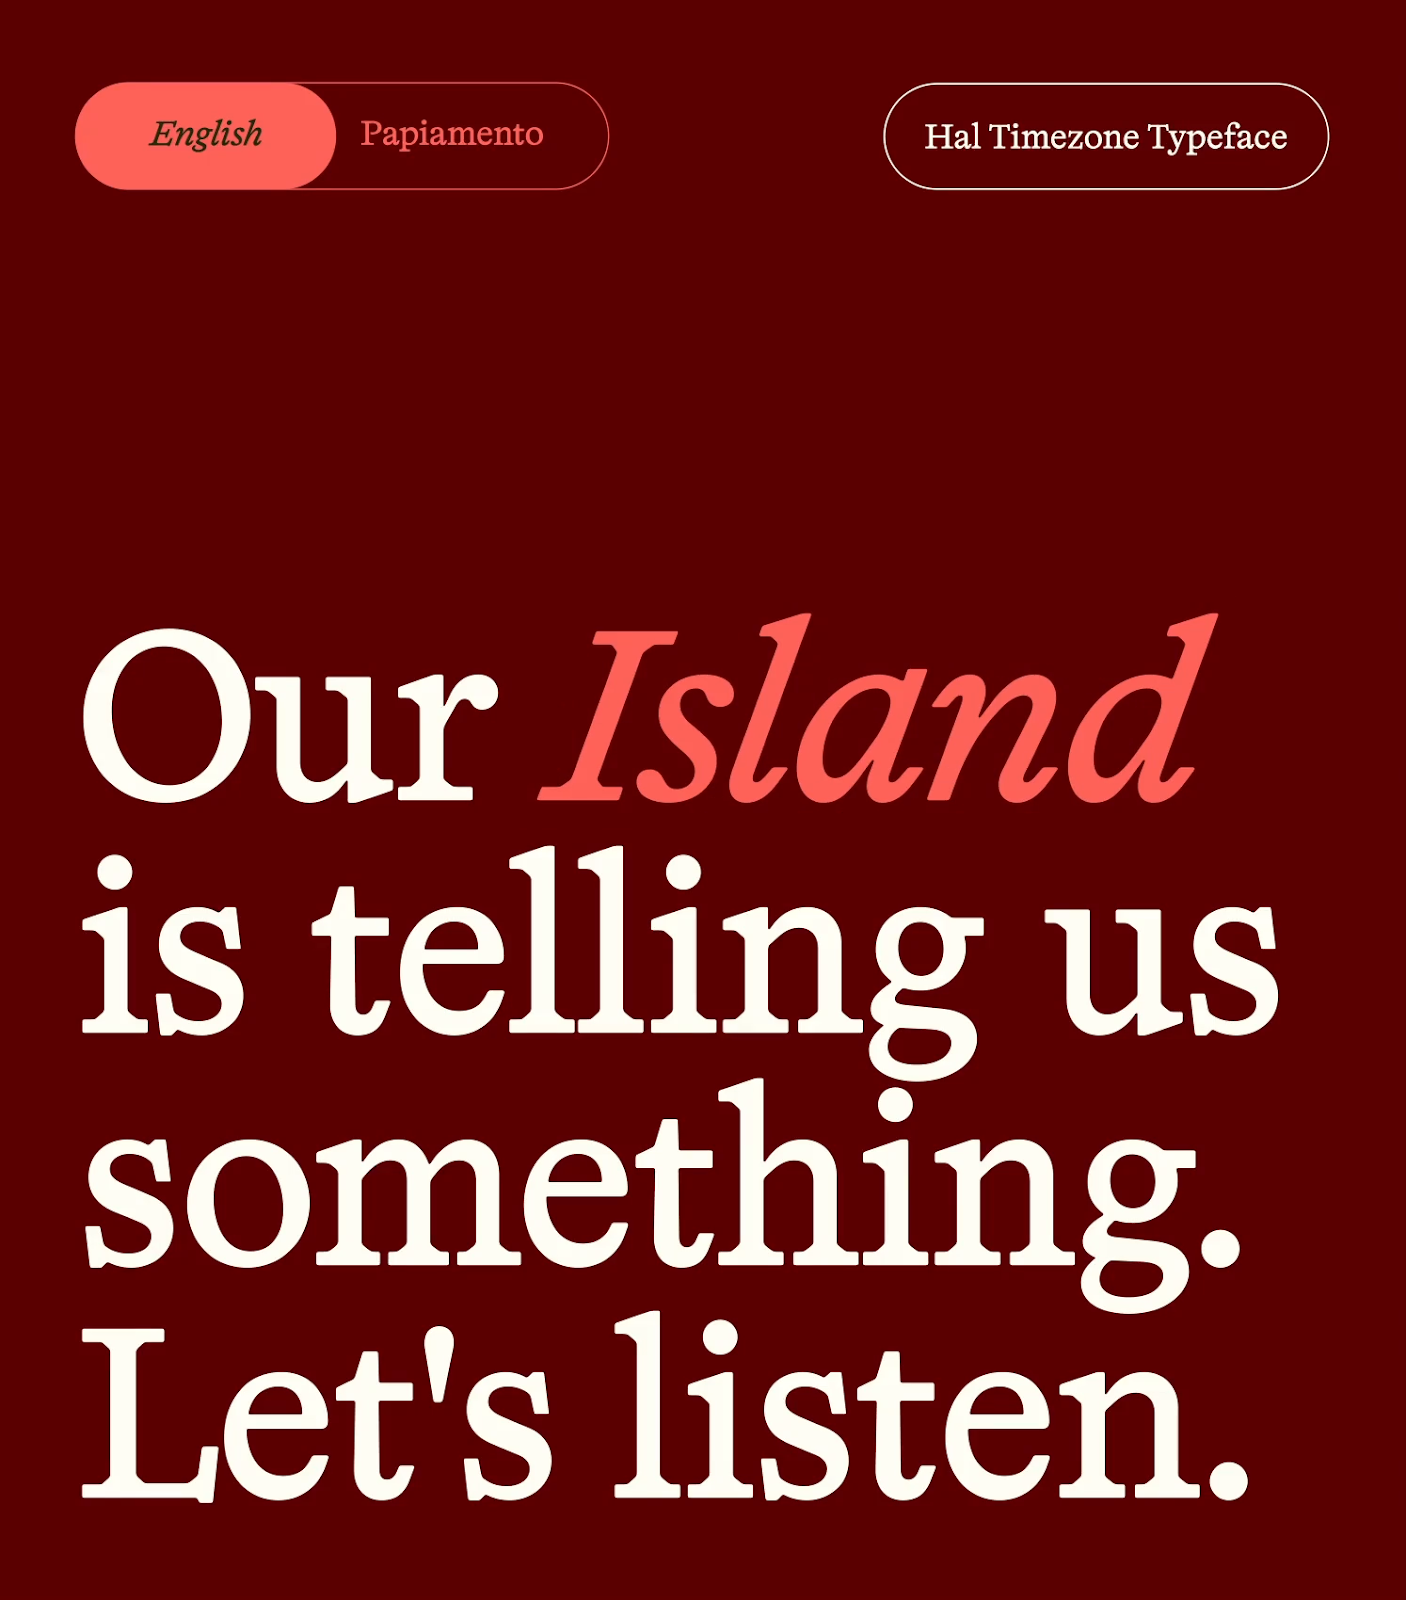 Artifact from the Aruba Conservation Foundation's New Branding by How&How article on Abduzeedo